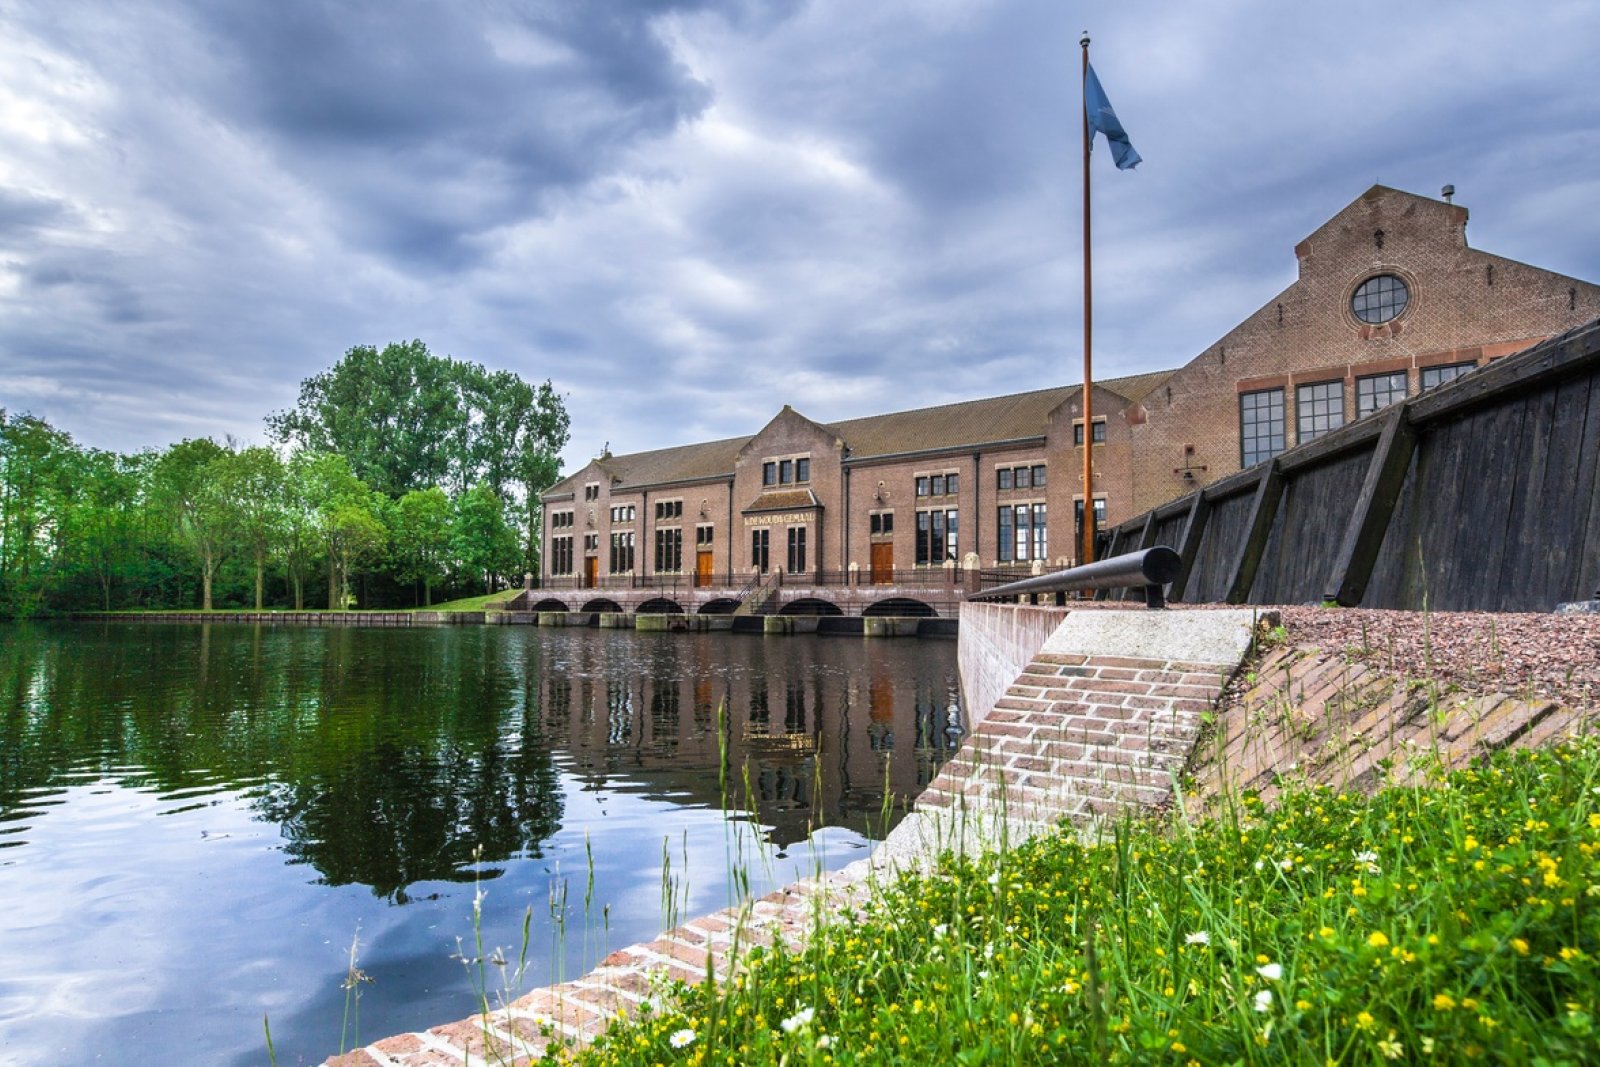 View of the Woudagemaal pumping station